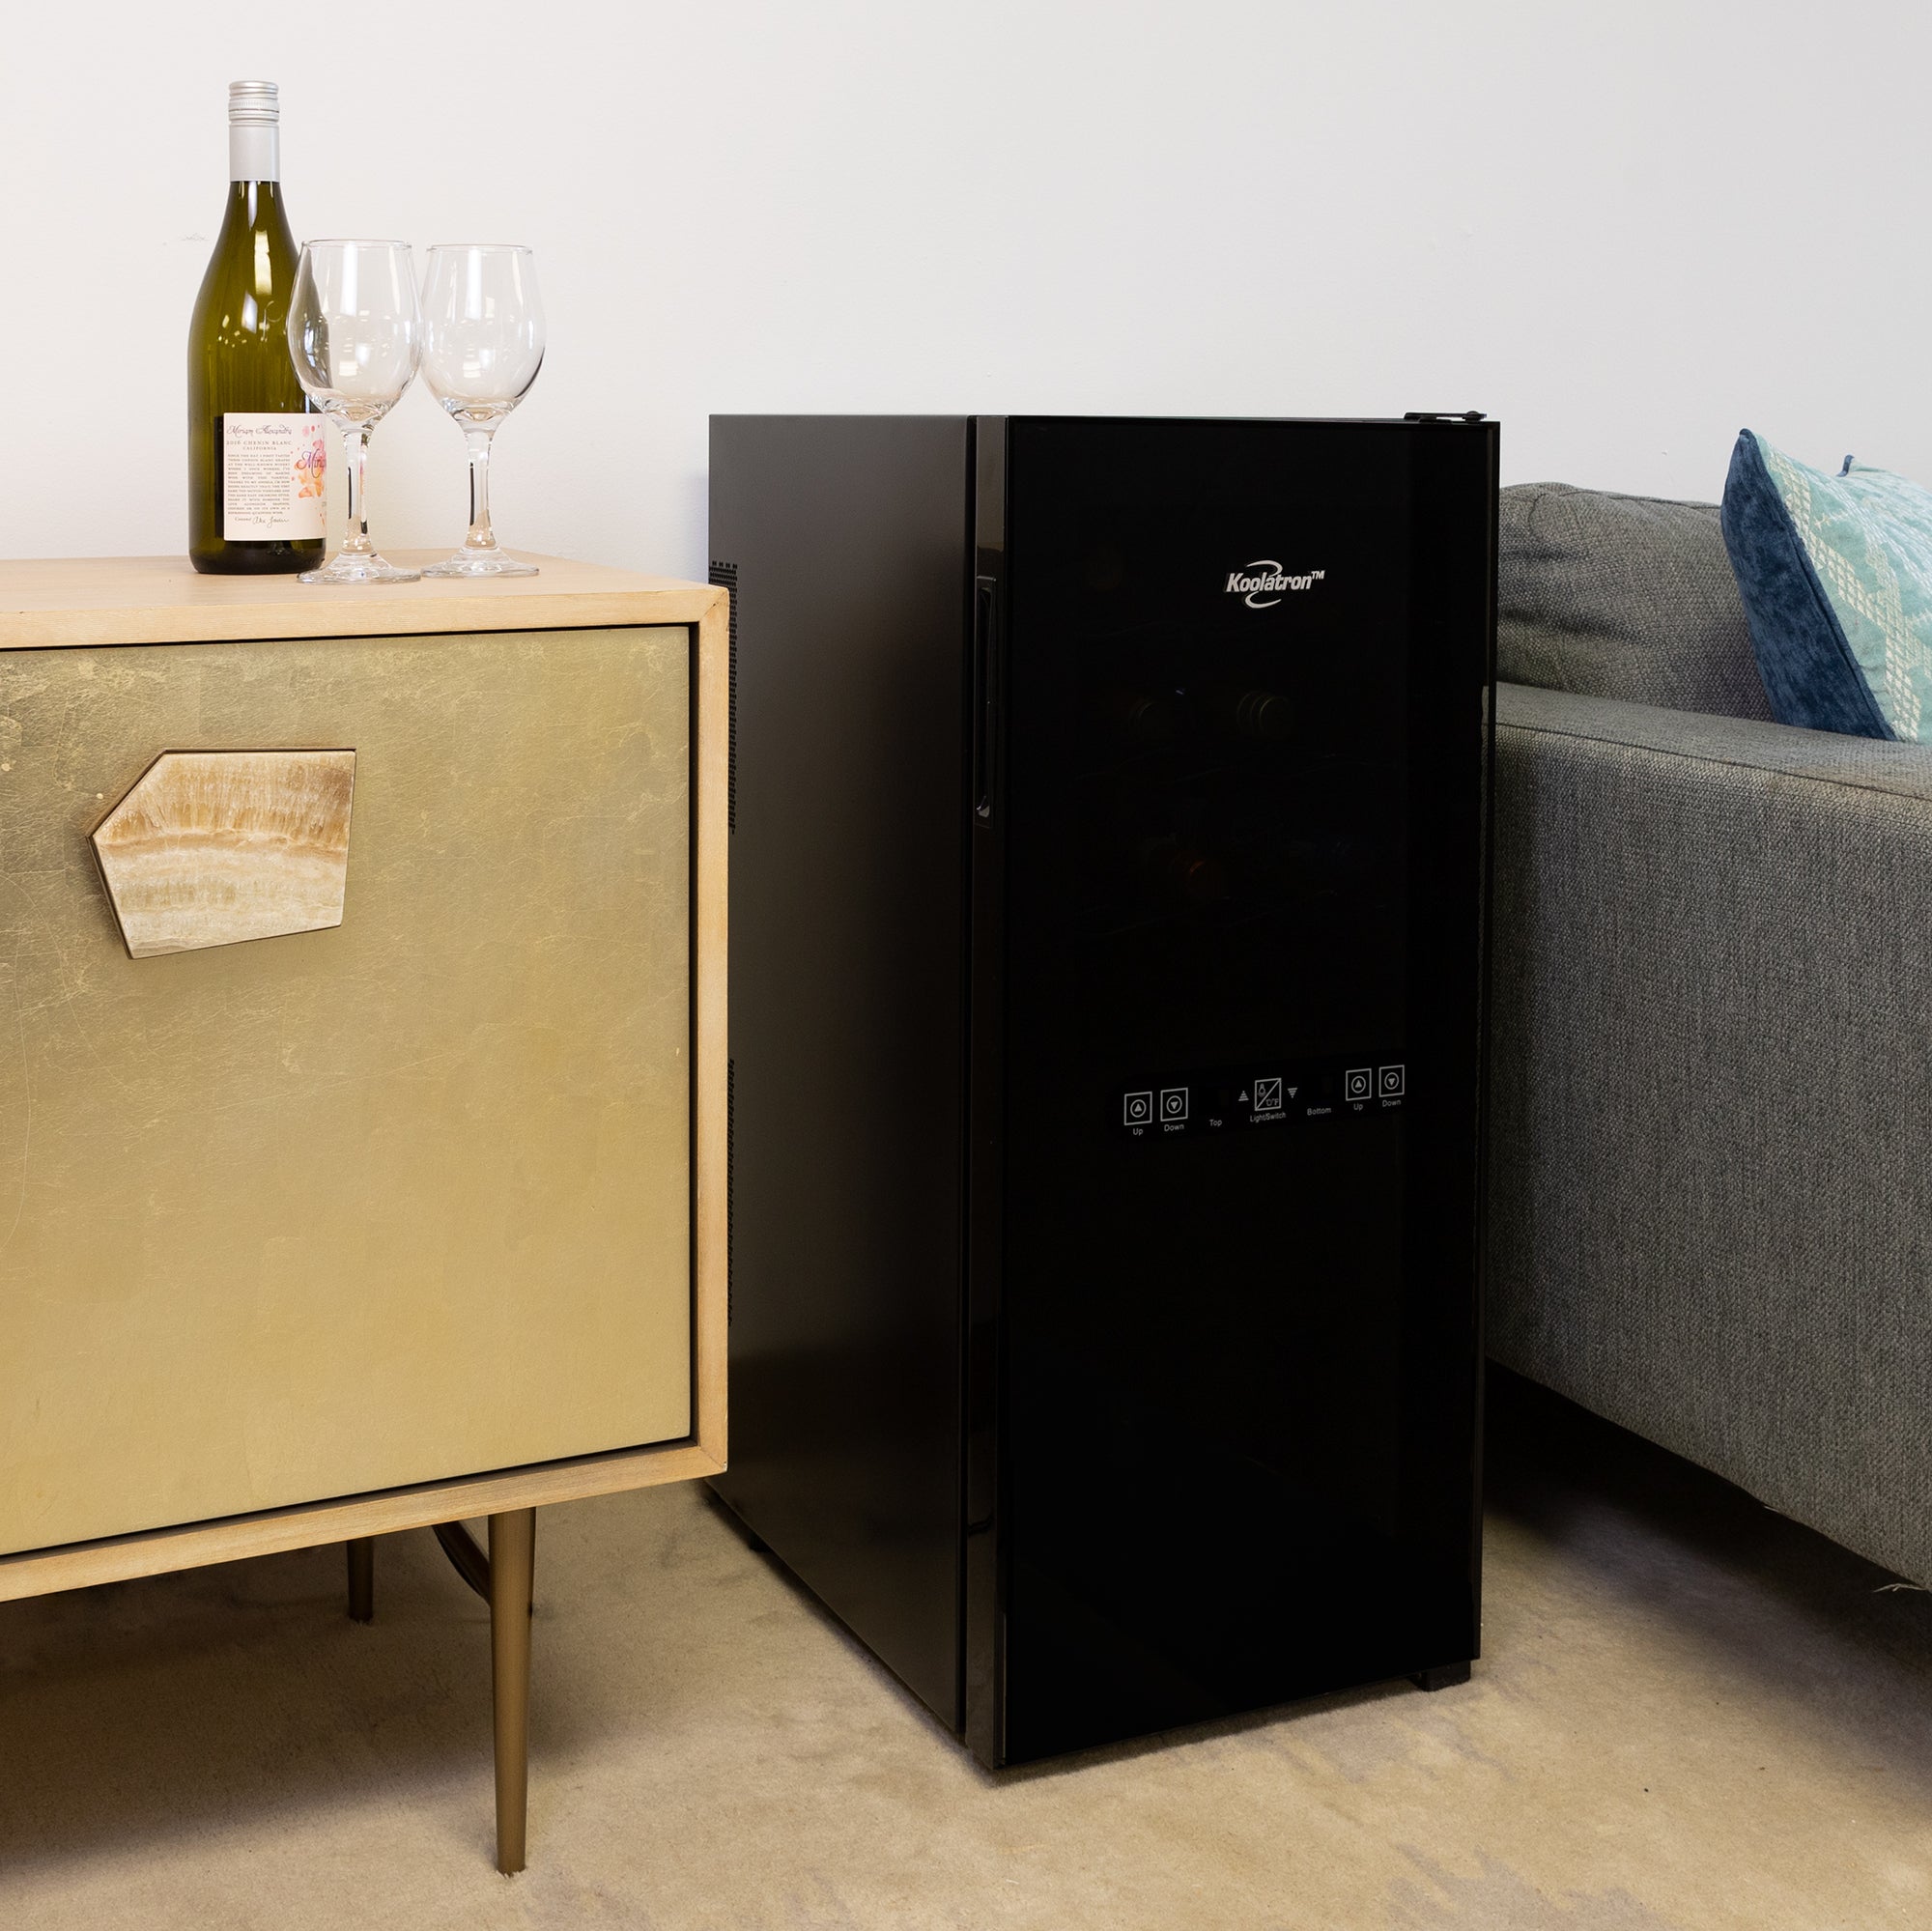 Koolatron 24 bottle dual zone wine cooler, closed, between a gray sofa and a gold-coloured sideboard with a bottle of wine and two glasses on it